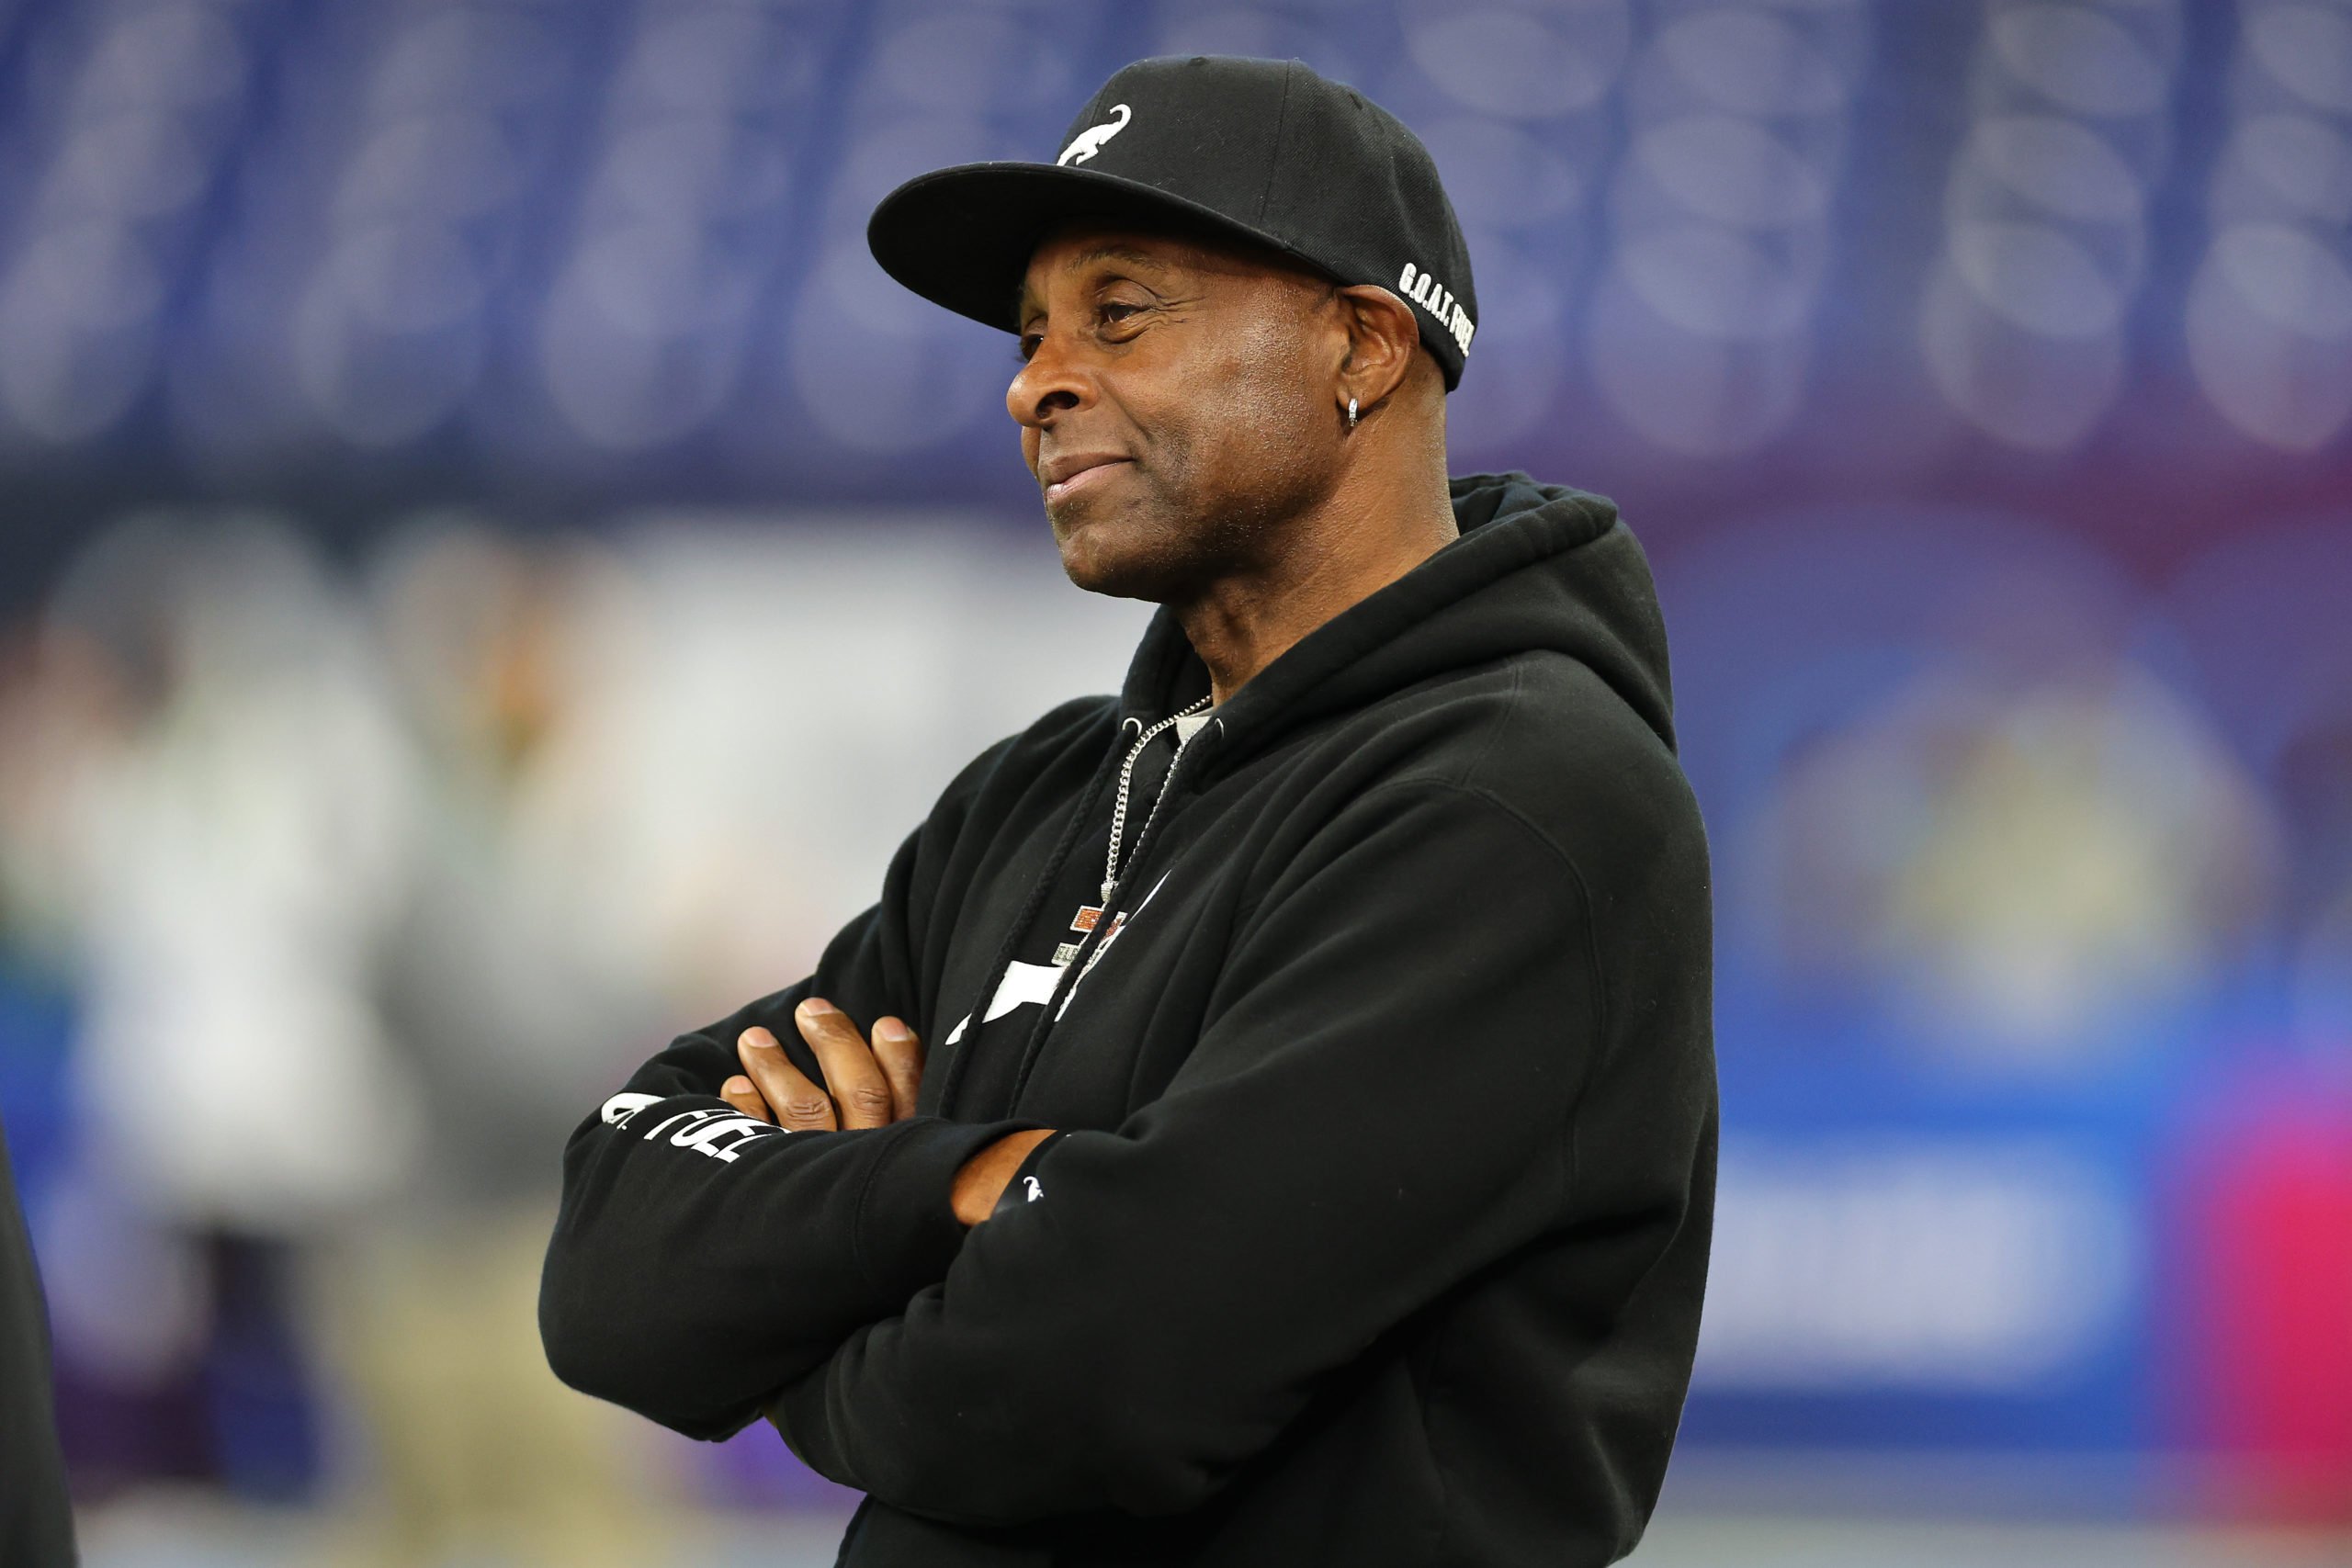 INDIANAPOLIS, INDIANA - MARCH 02: Former San Francisco 49ers Wide Receiver Jerry Rice looks on during the NFL Combine at Lucas Oil Stadium on March 02, 2024 in Indianapolis, Indiana. (Photo by Stacy Revere/Getty Images)